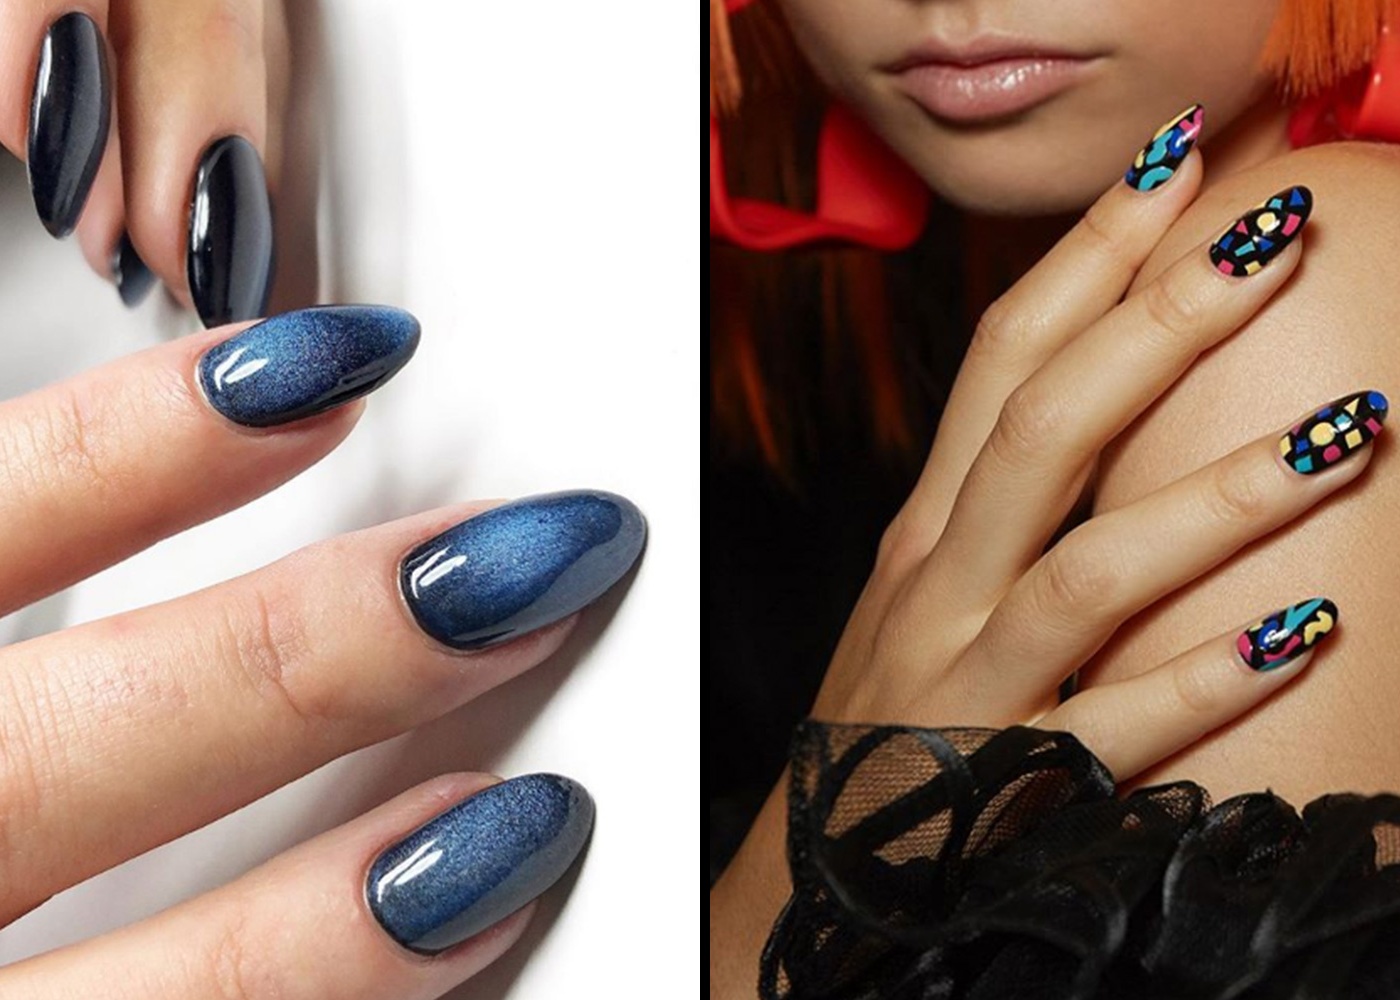 5. Gel X Nails: The Hottest Nail Trend for Square Nails - wide 11